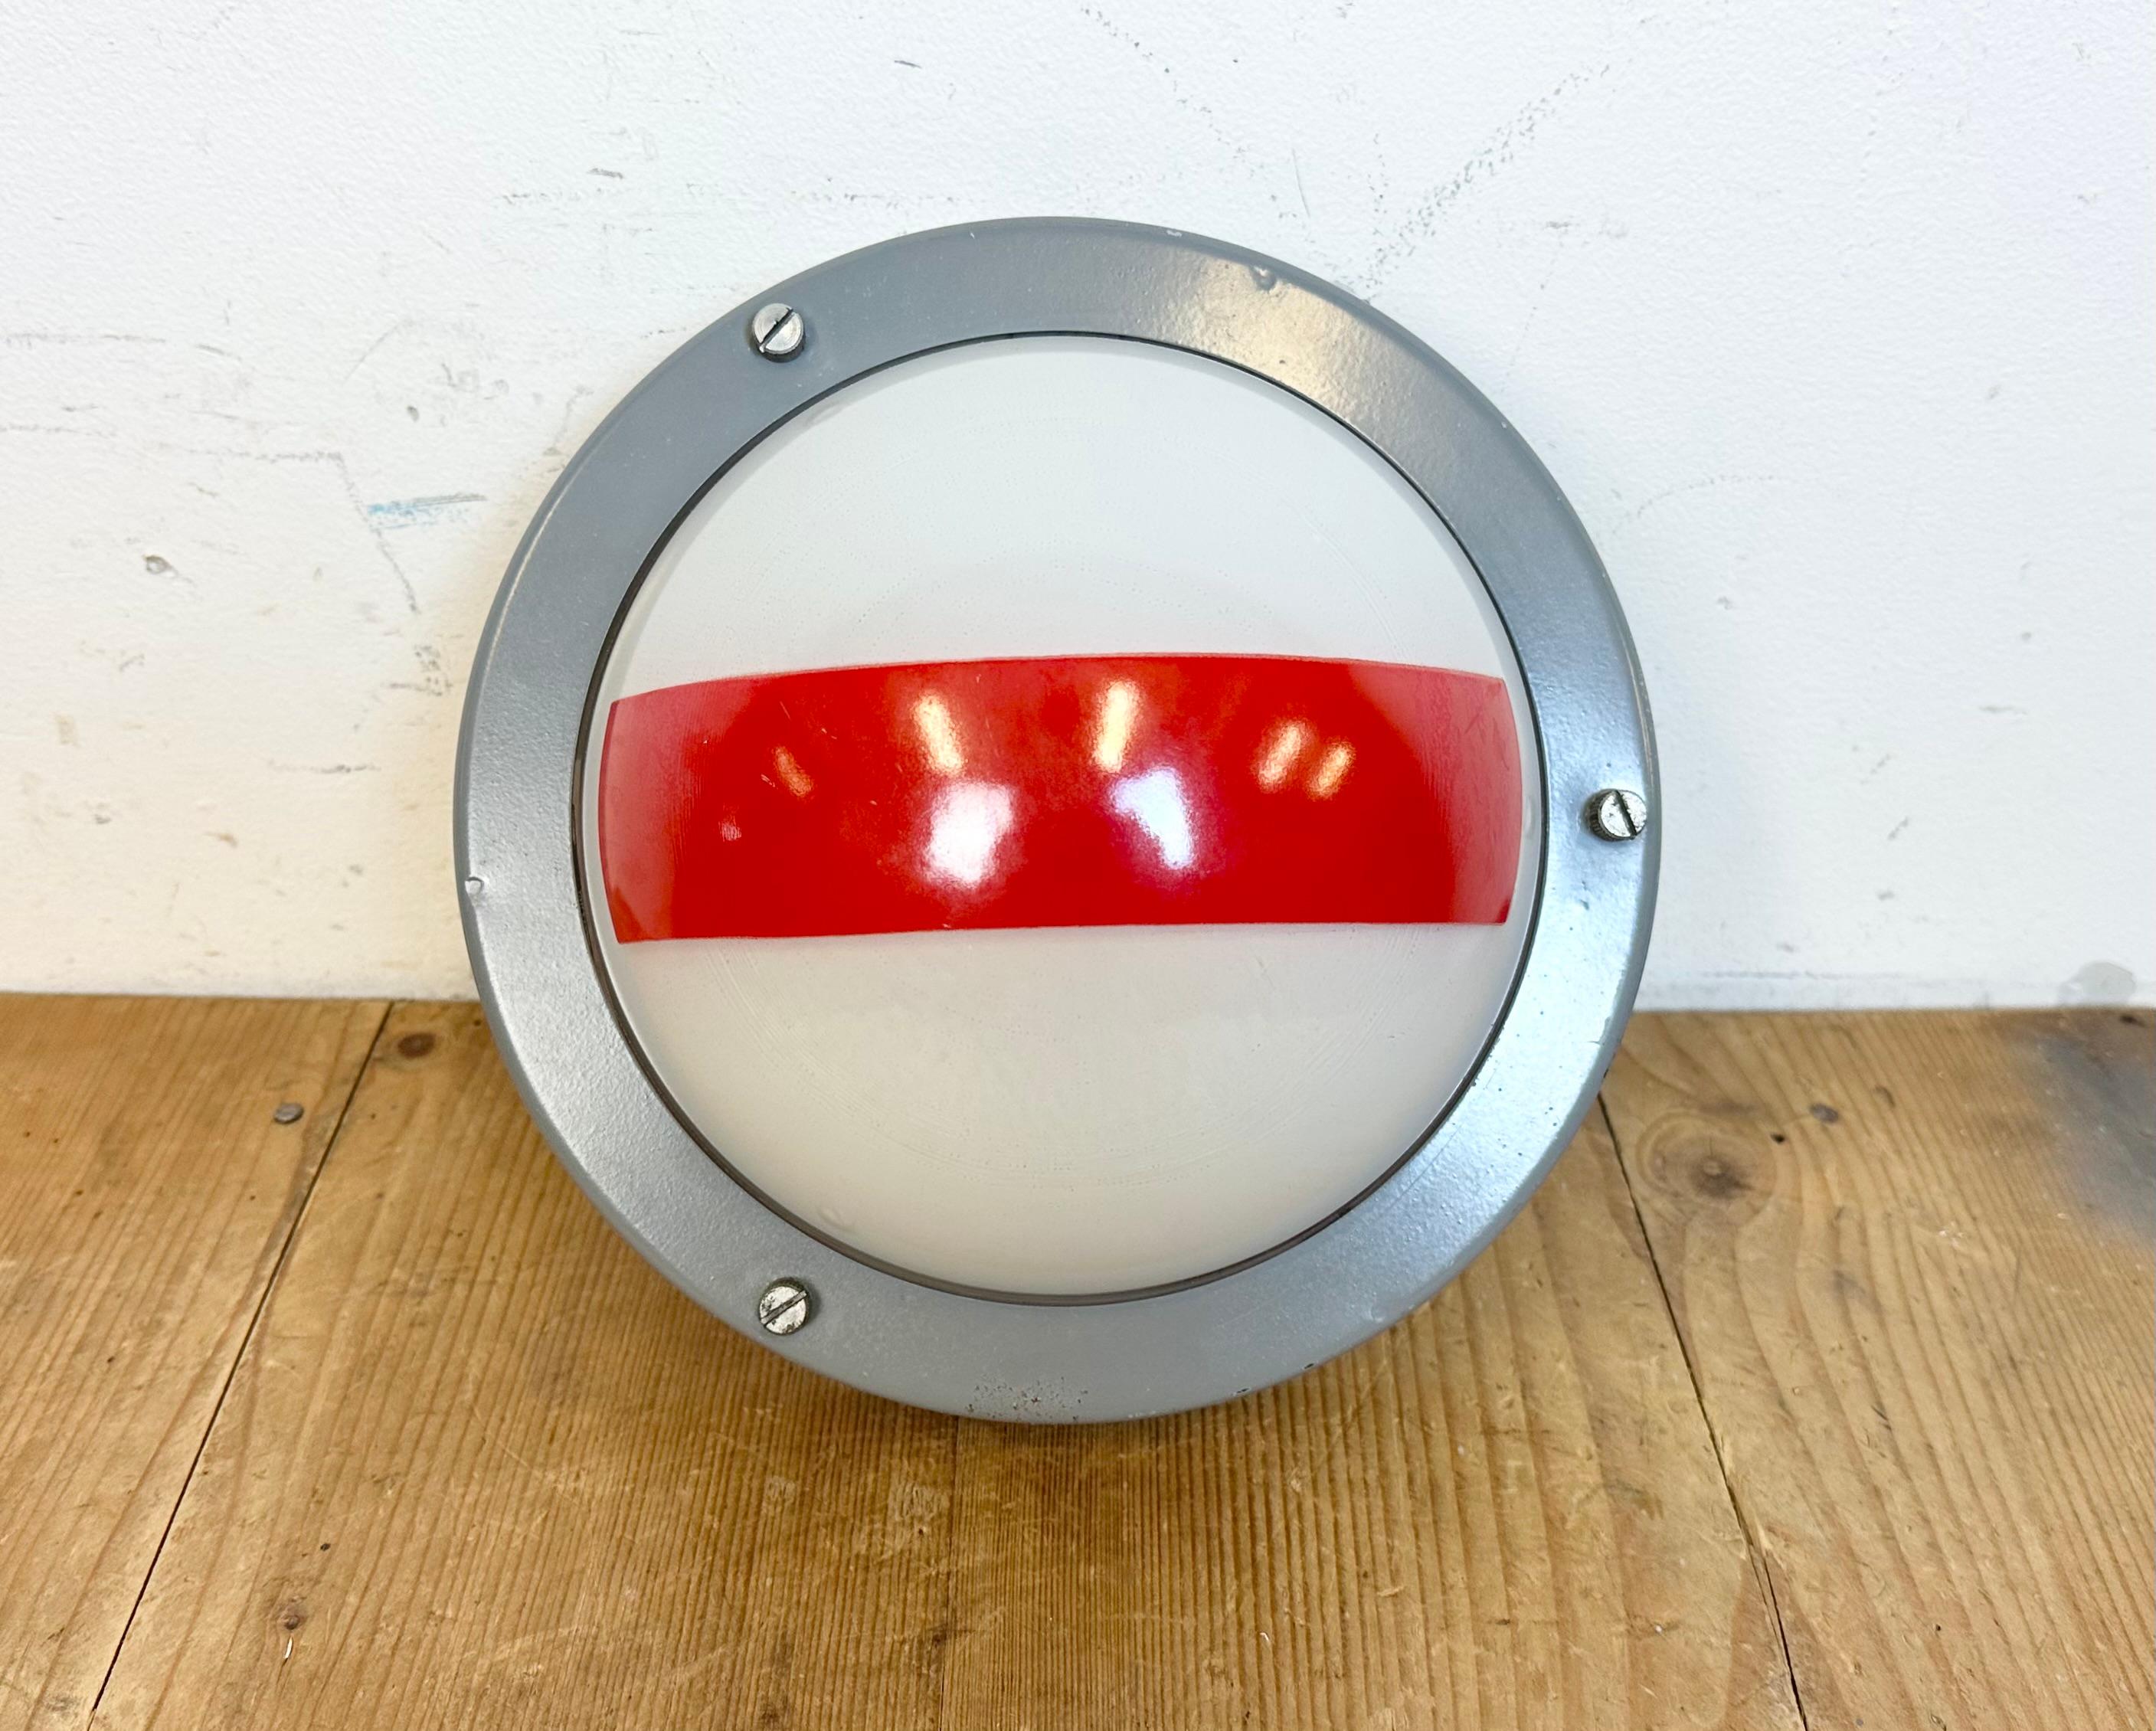 Vintage industrial emergency wall light made by Elektrosvit in former Czechoslovakia during the 1970s. It featutes a dark grey iron body and a milk glass cover.
The socket requires standard E27 / E26 lightbulbs. The diameter of the light is 24 cm.